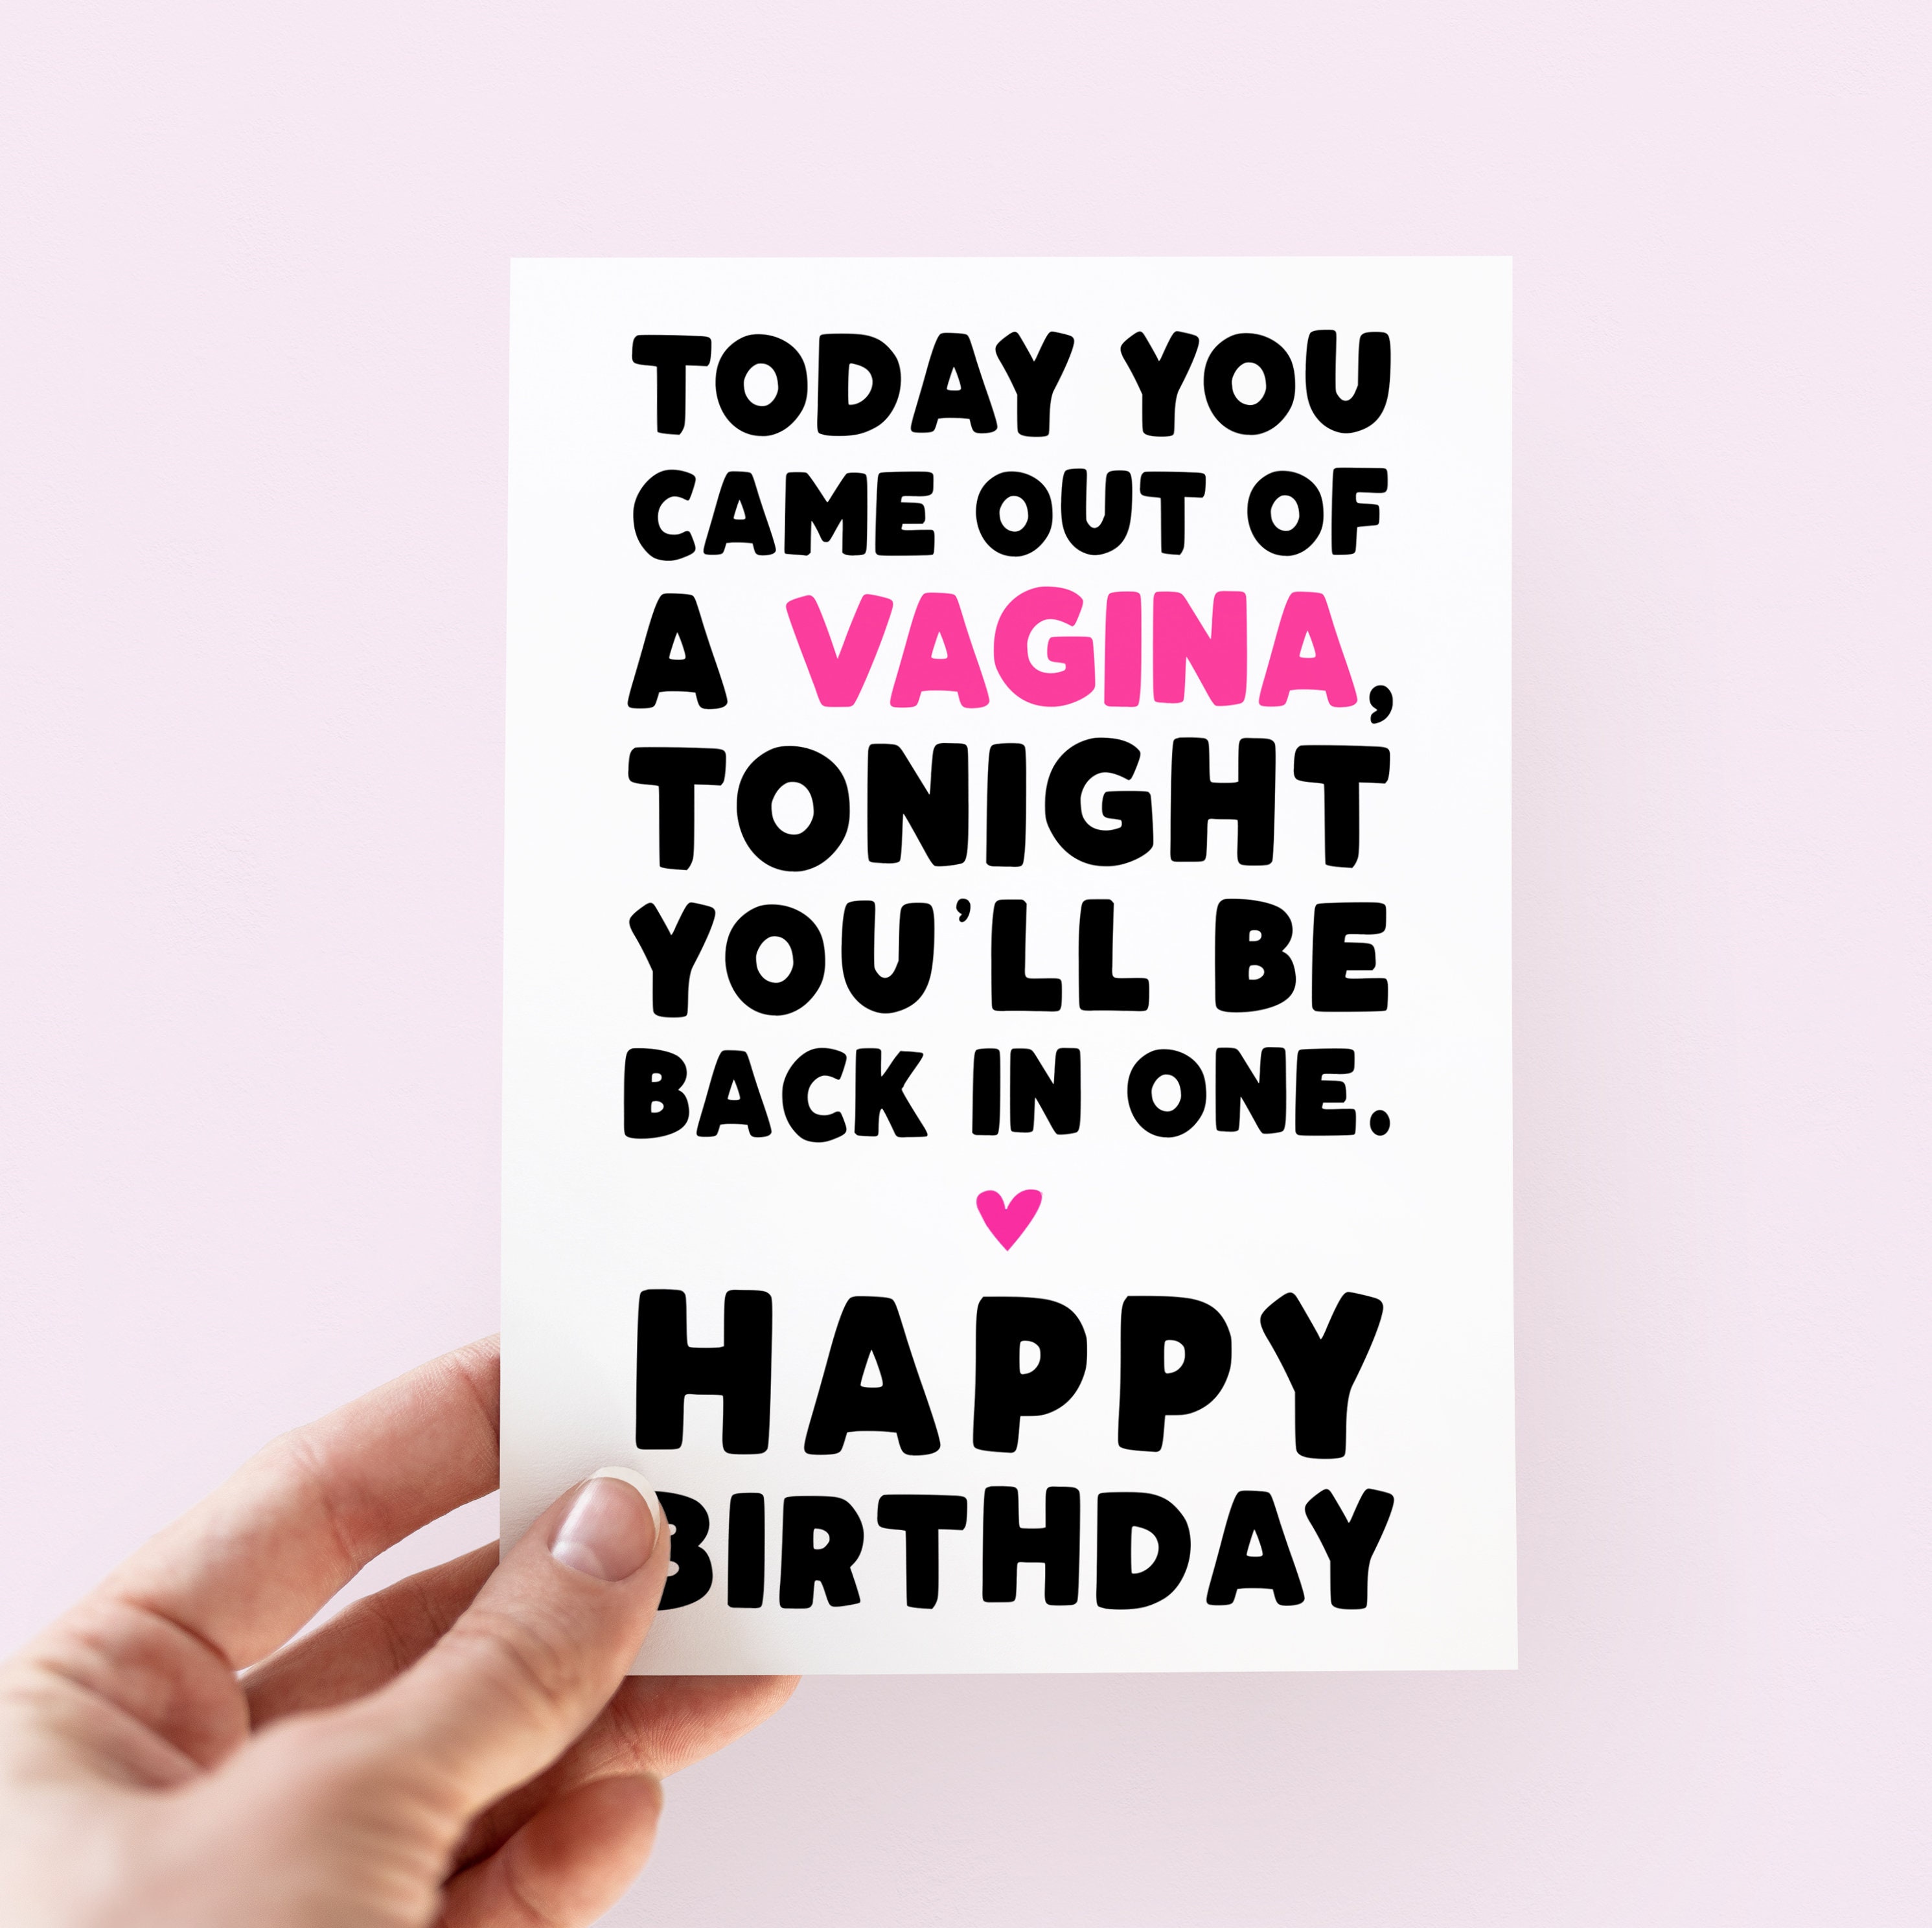 Today You Came Out of A Vagina Birthday Card Funny pic